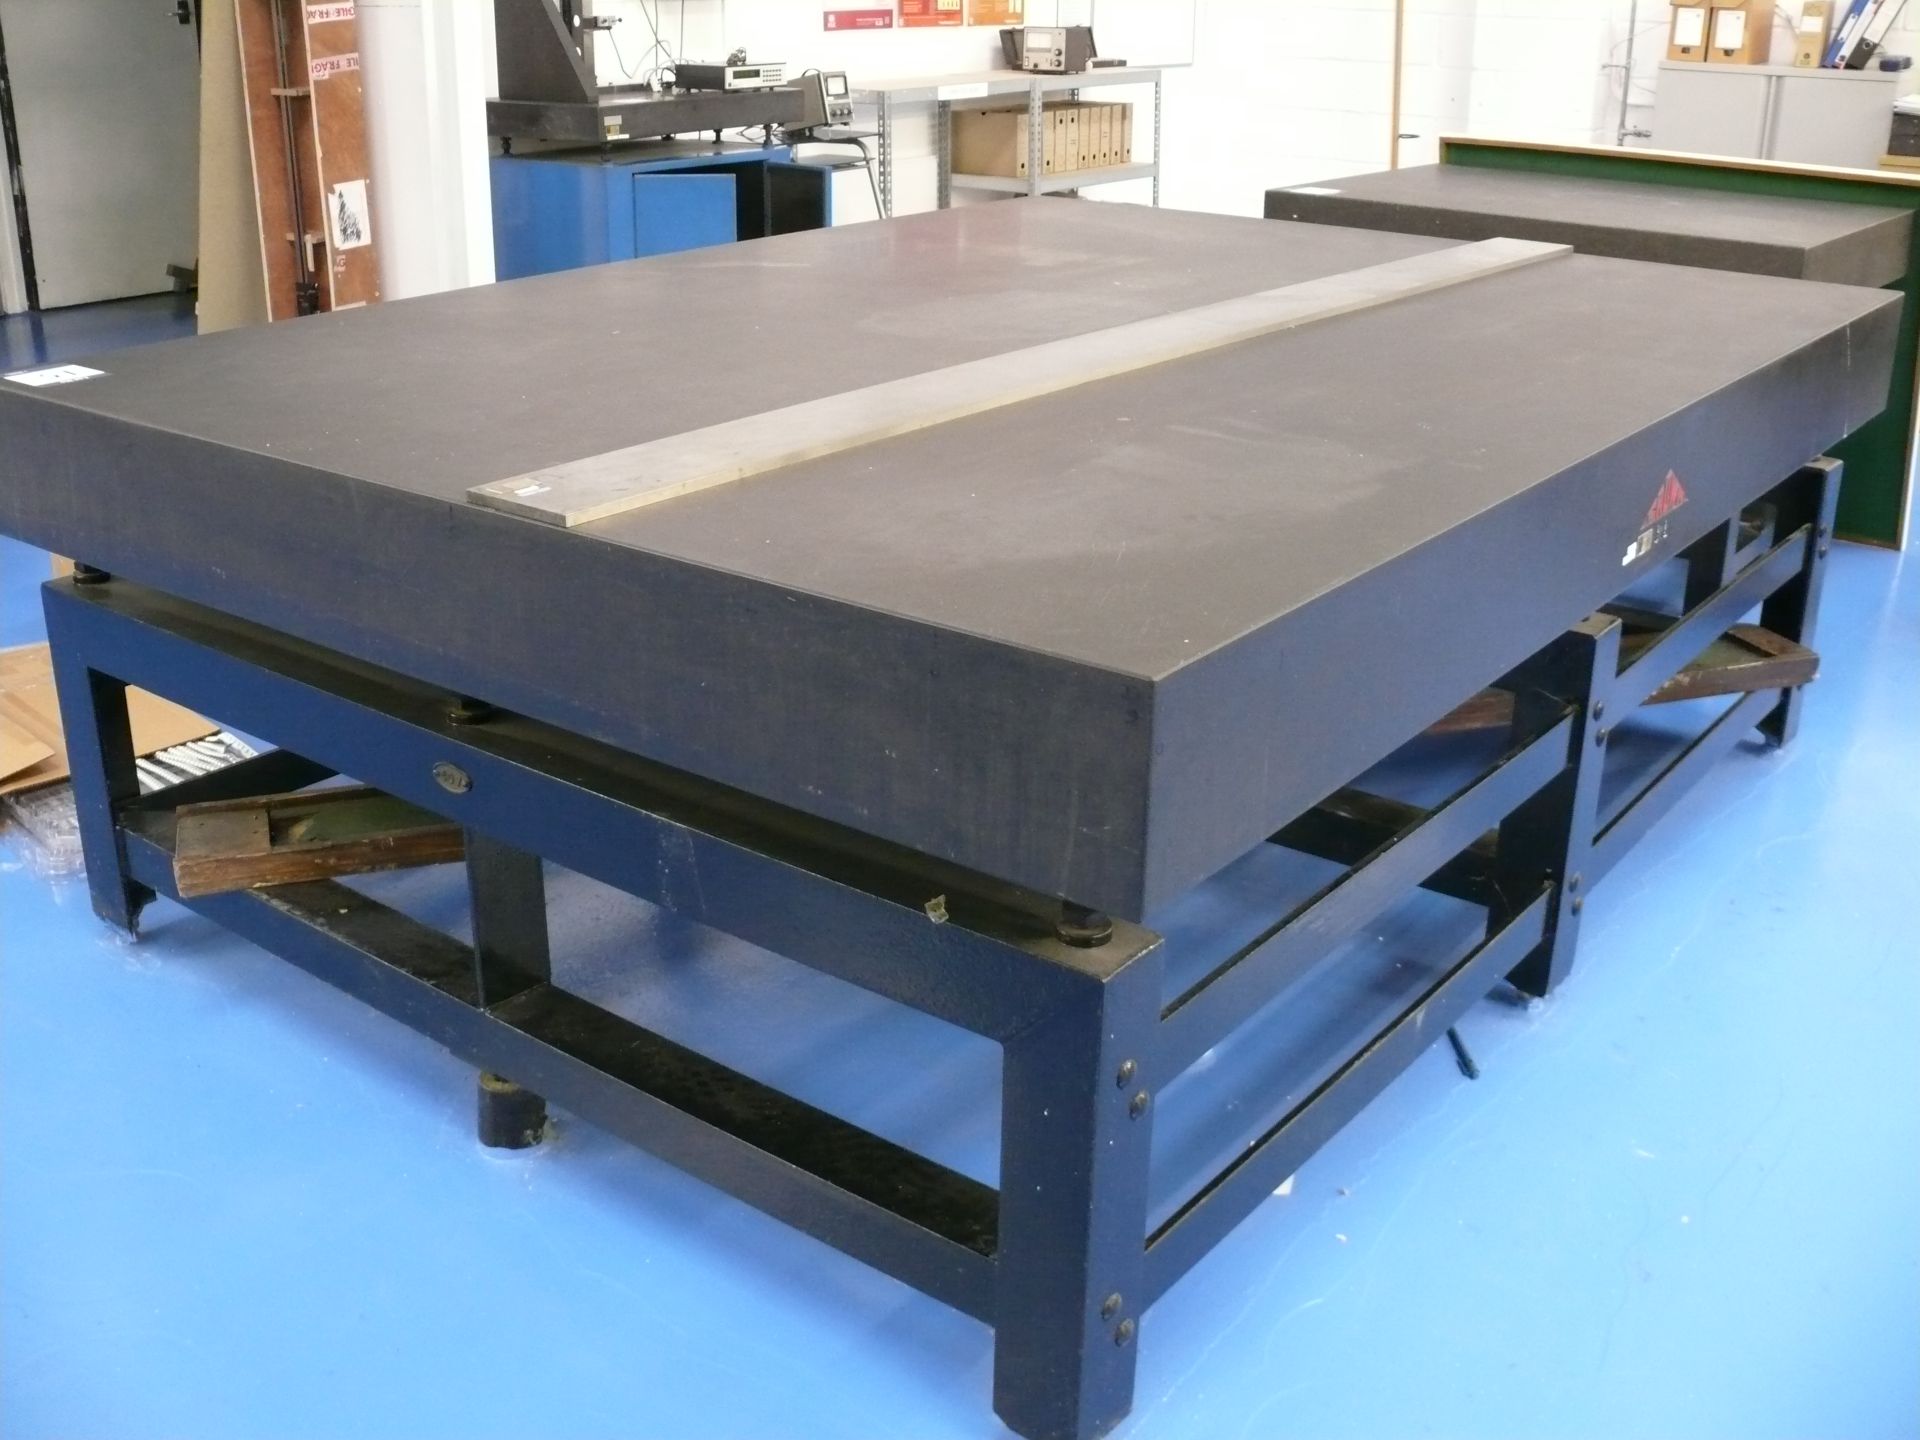 Crown granite inspection table, 2430 x 1830mm